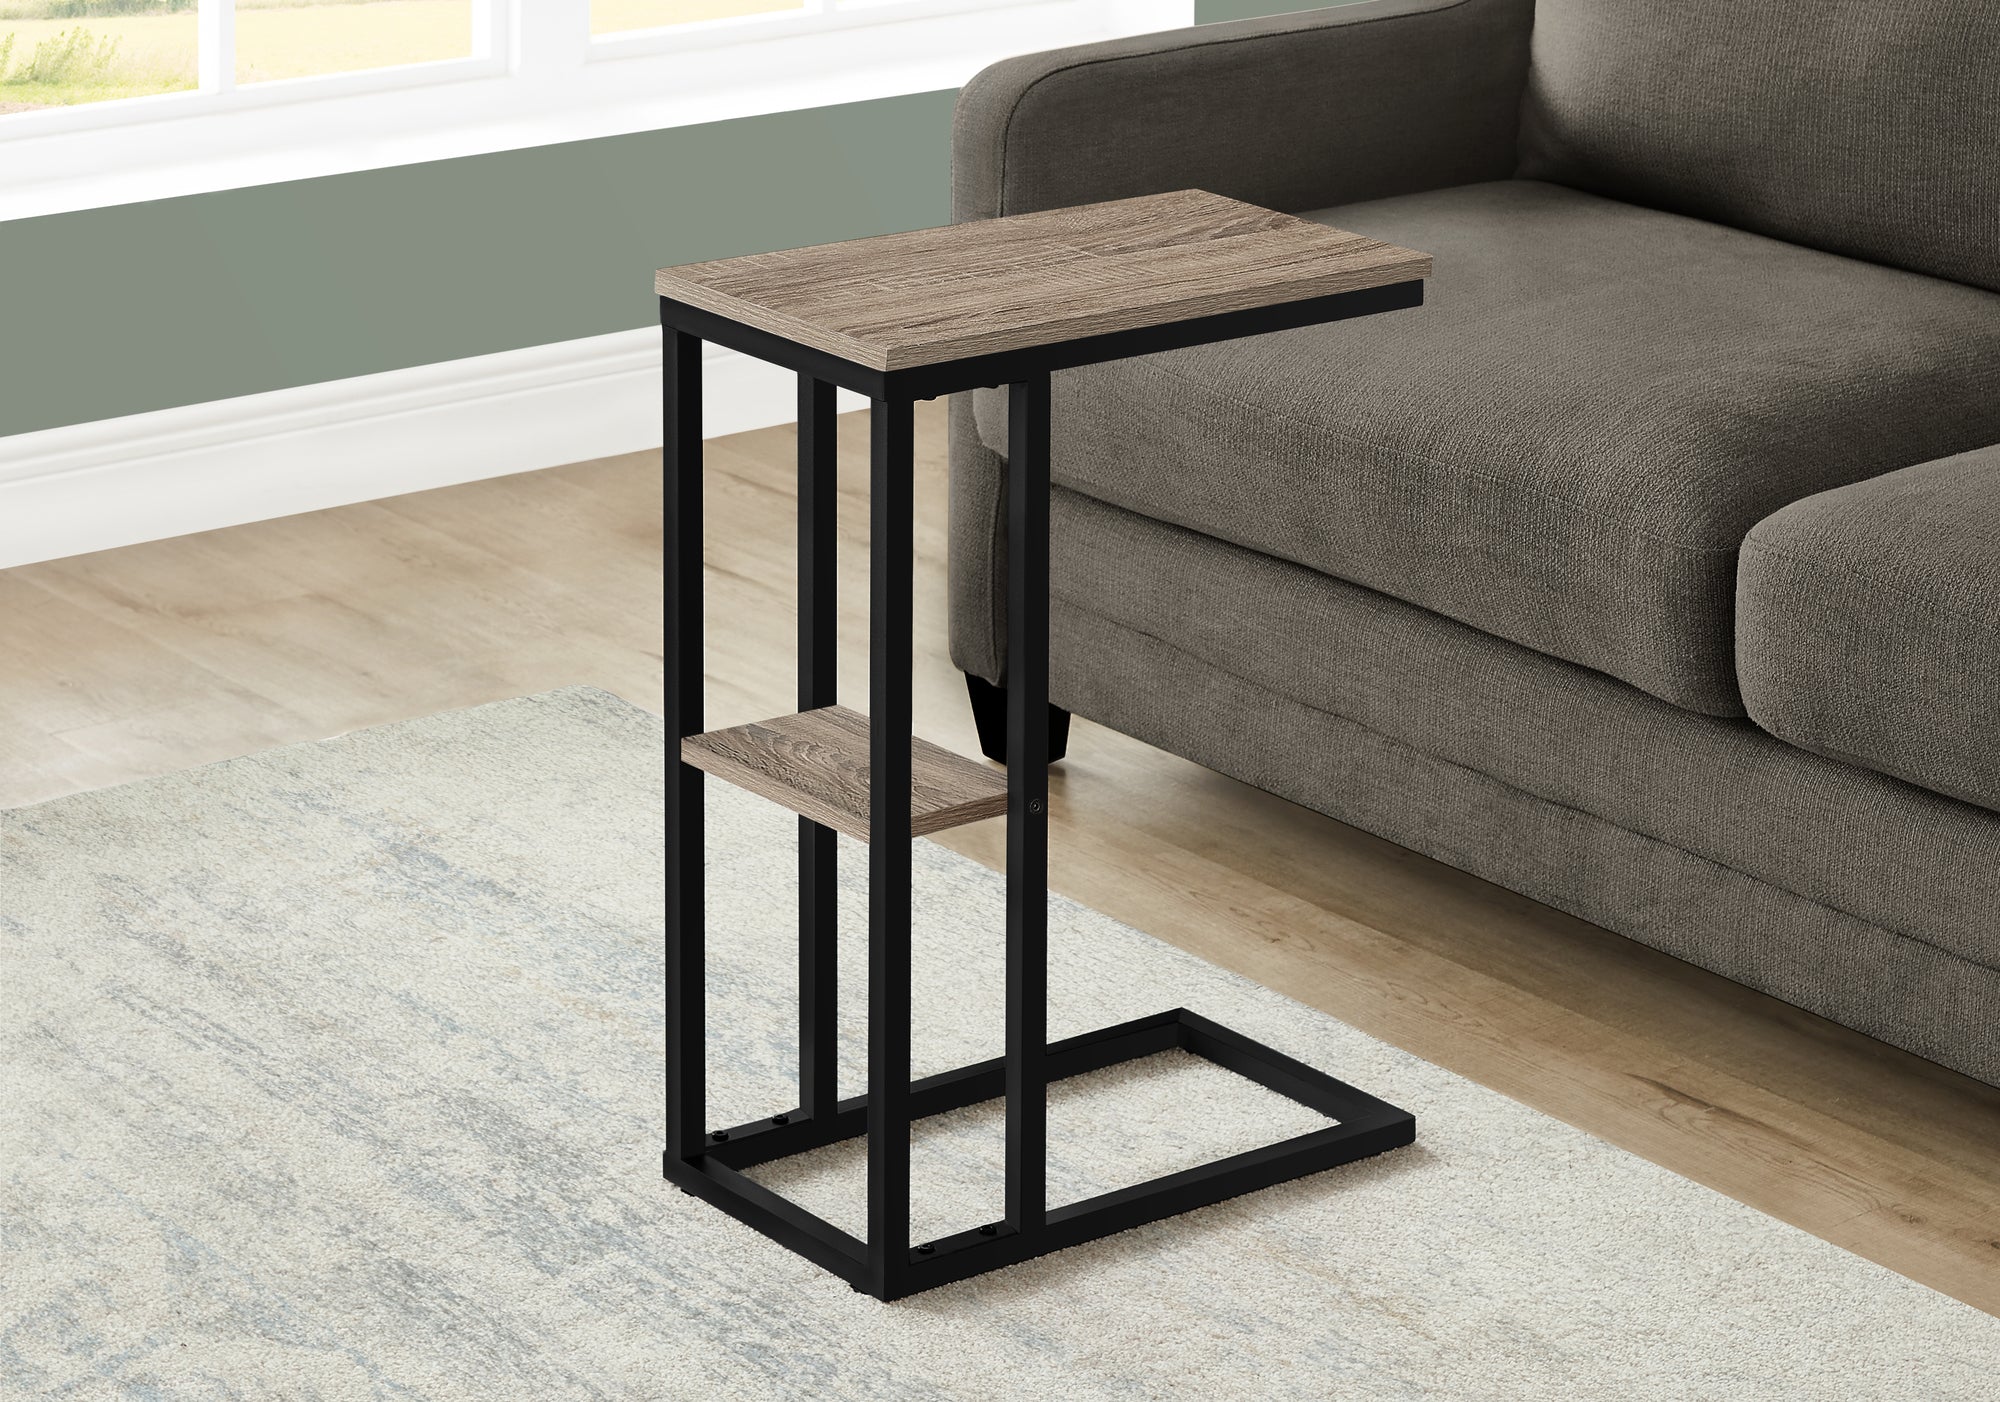 MN-183672    Accent Table, C-Shaped, End, Side, Snack, Living Room, Bedroom, Metal Legs, Laminate, Dark Taupe, Black, Contemporary, Modern